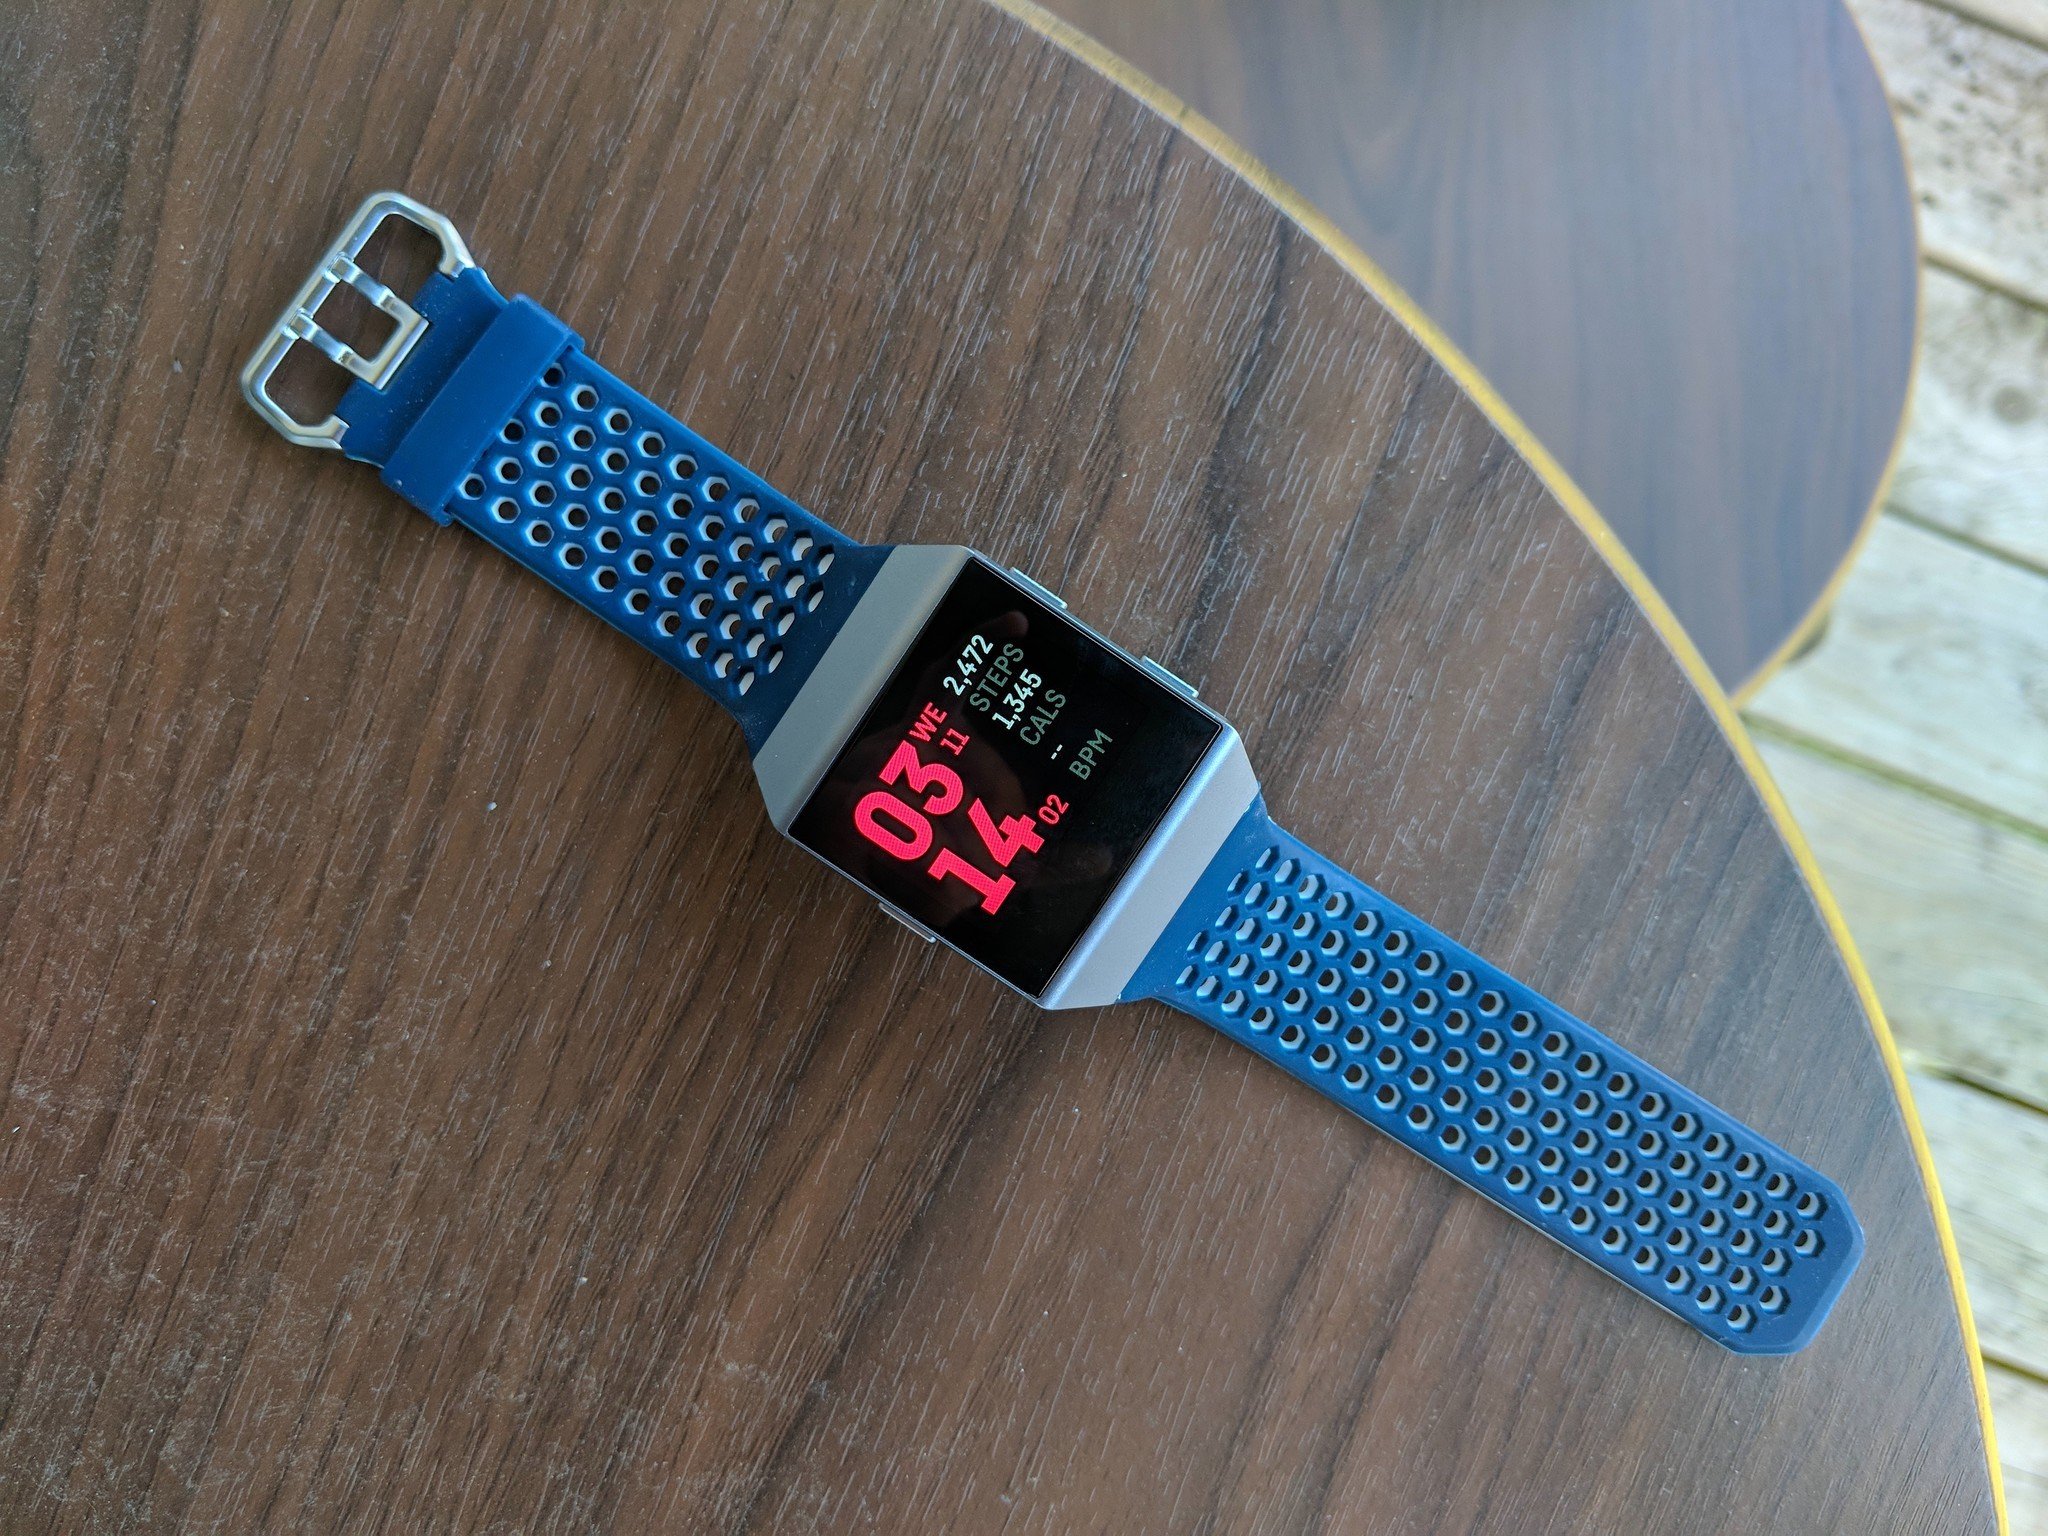 fitbit ionic bands near me